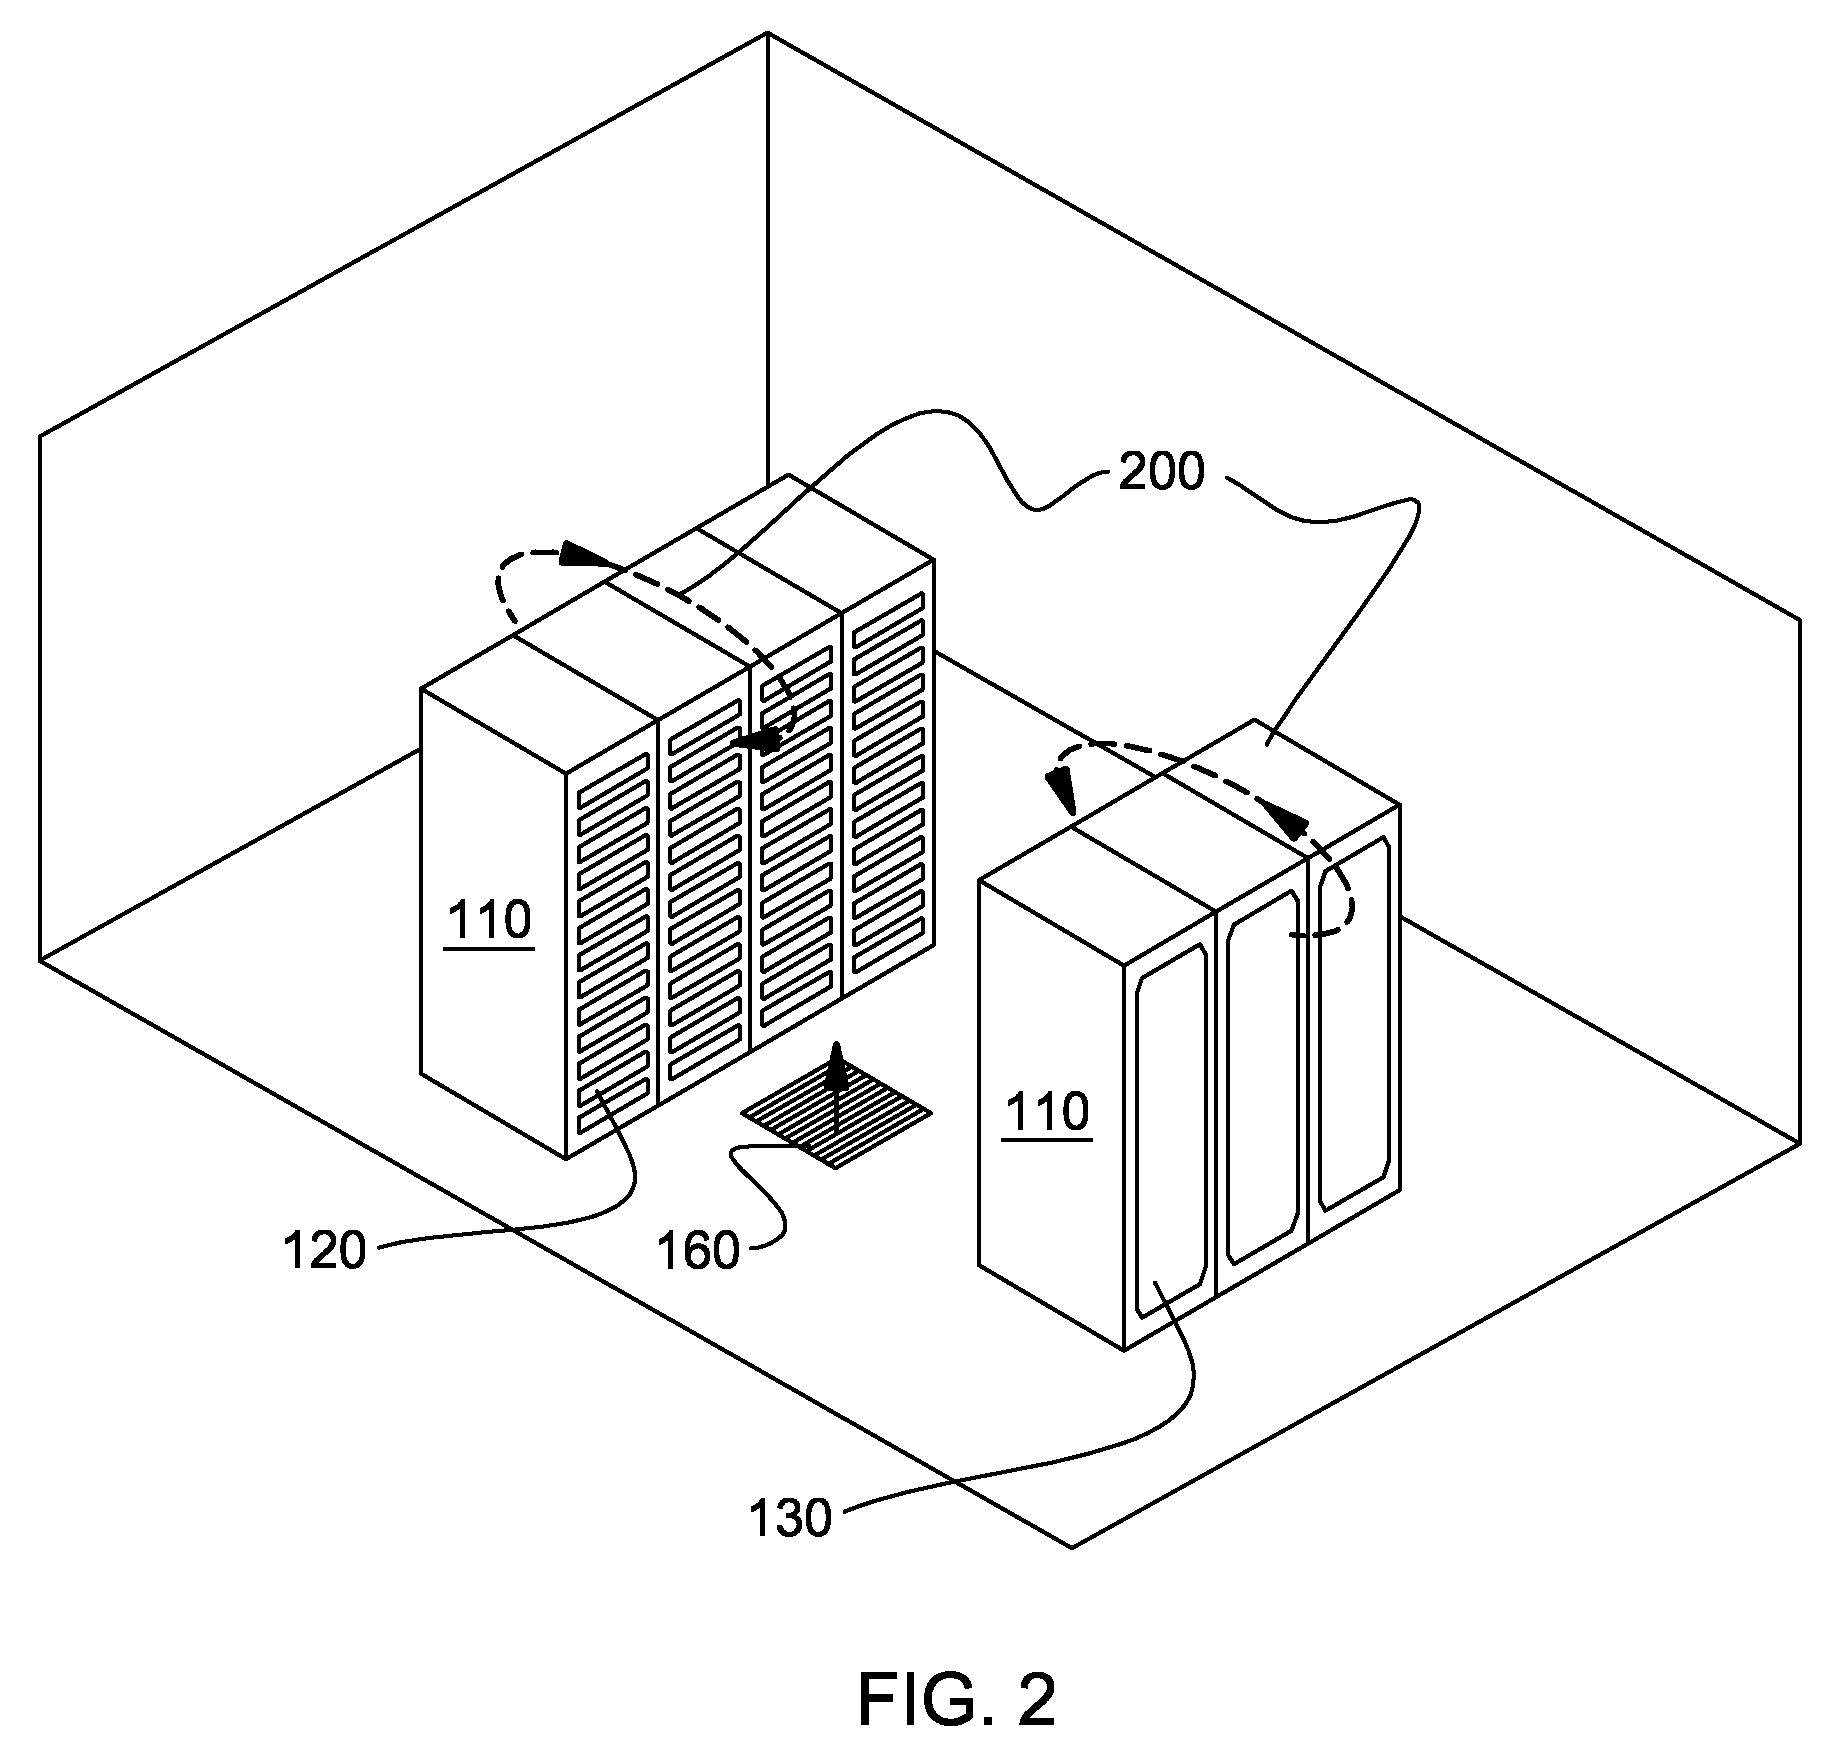 Hybrid air and liquid coolant conditioning unit for facilitaating cooling of one or more electronics racks of a data center